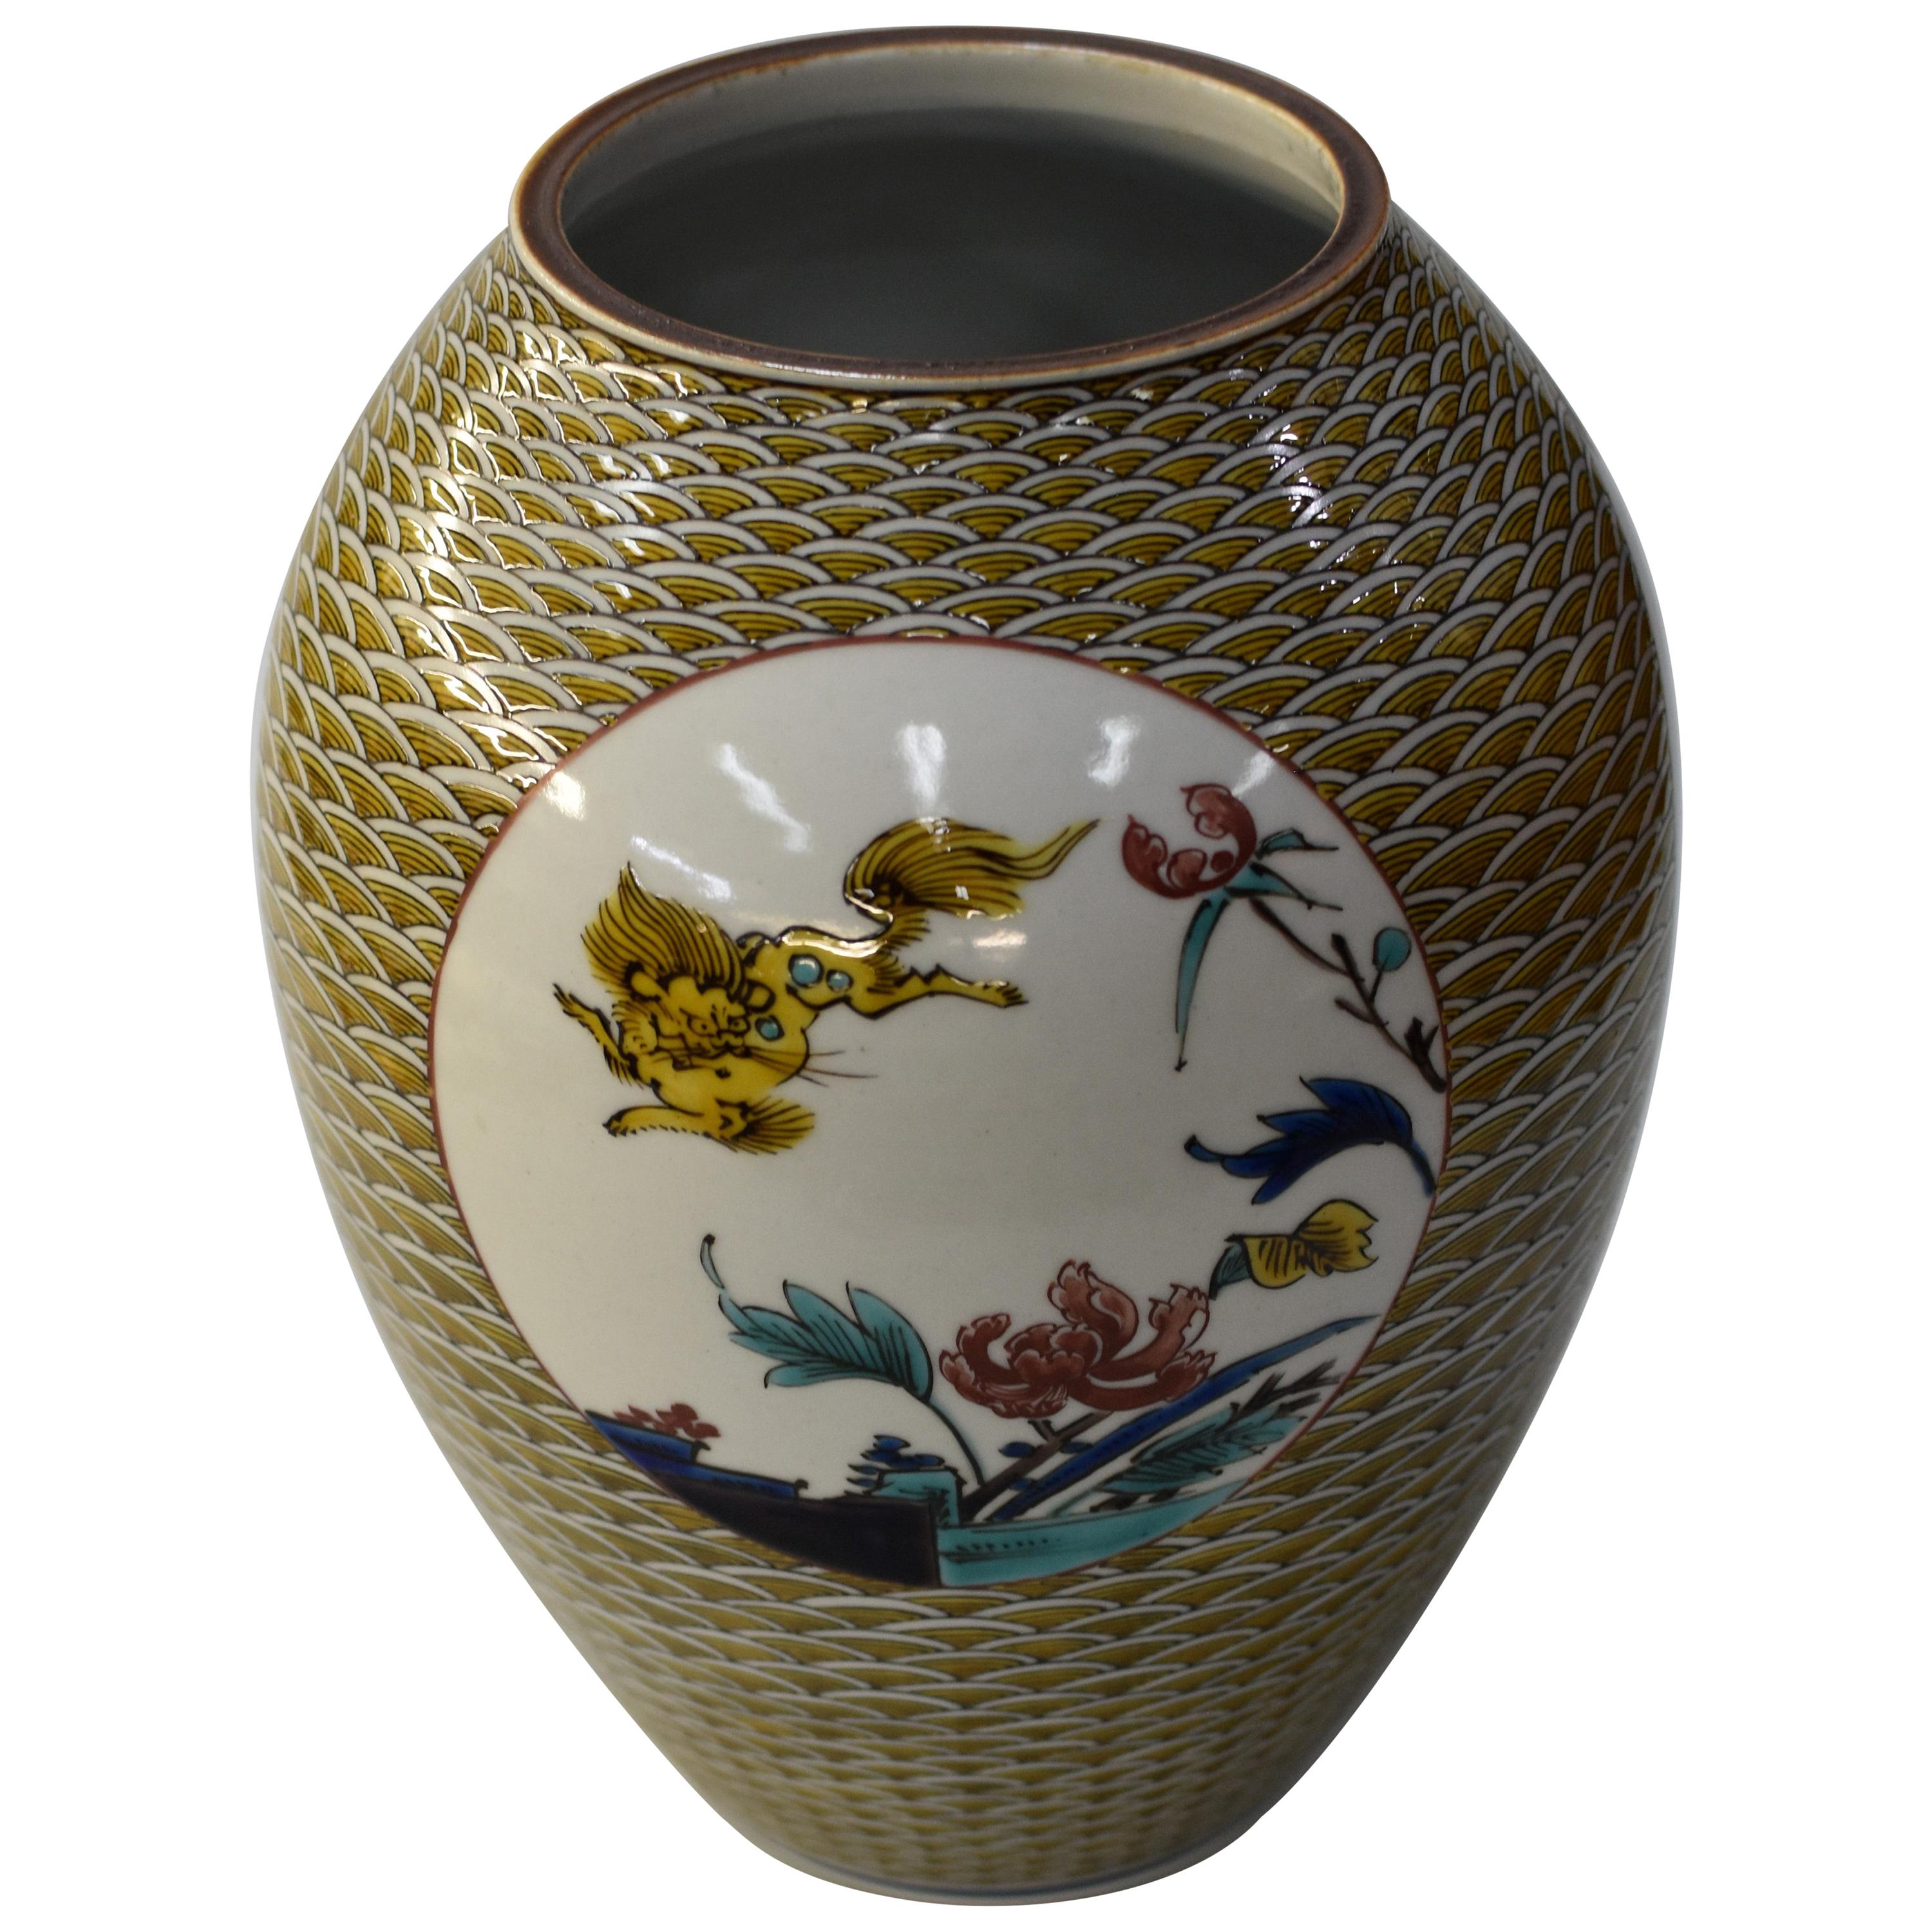 Japanese Contemporary Yellow Green Porcelain Vase by Master Artist